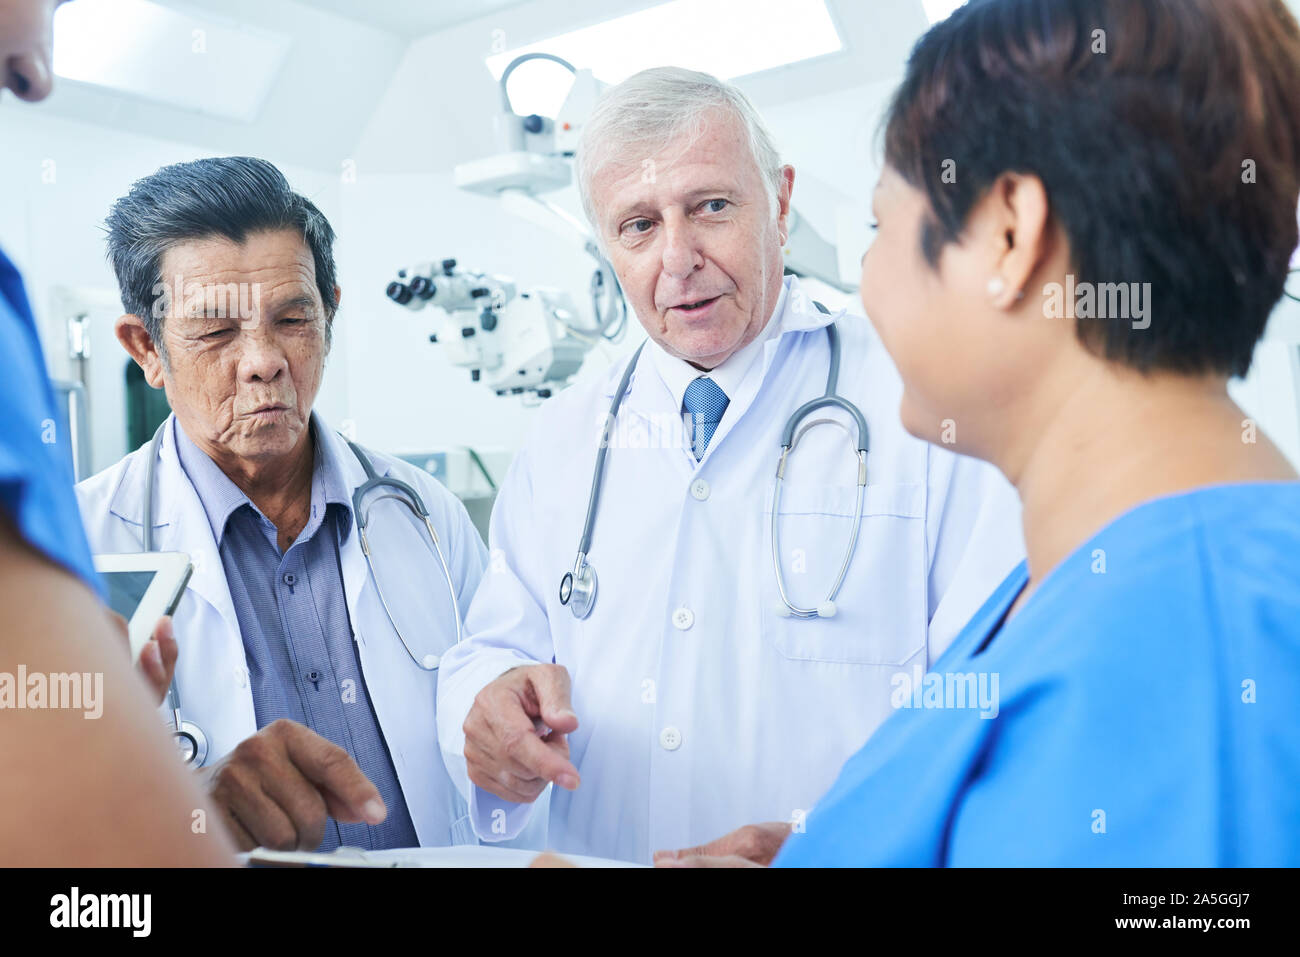 Group of doctors standing in operating room and discussing information in medical history of patient Stock Photo